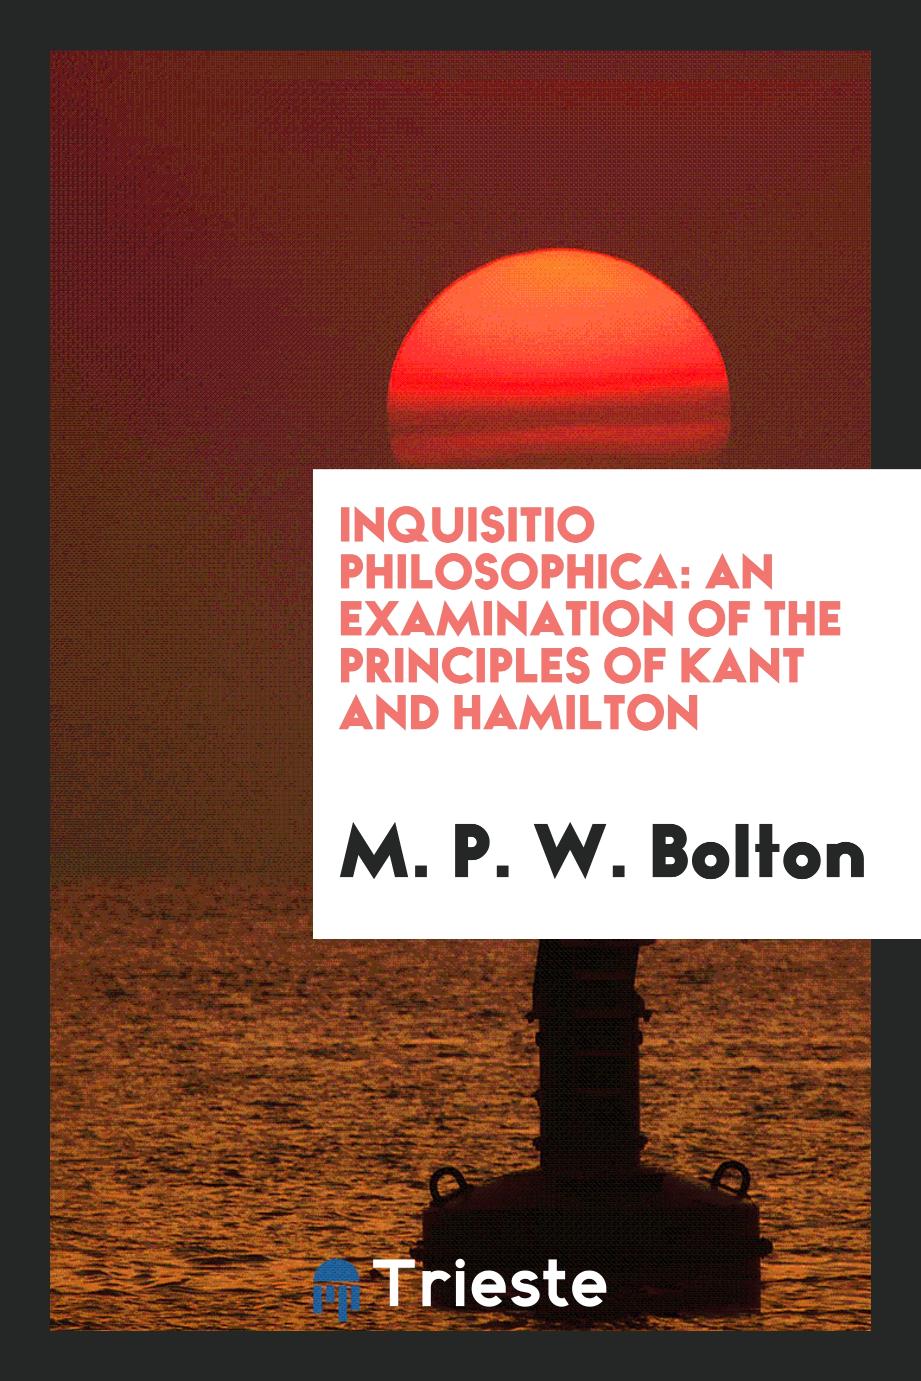 Inquisitio philosophica: an examination of the principles of Kant and Hamilton